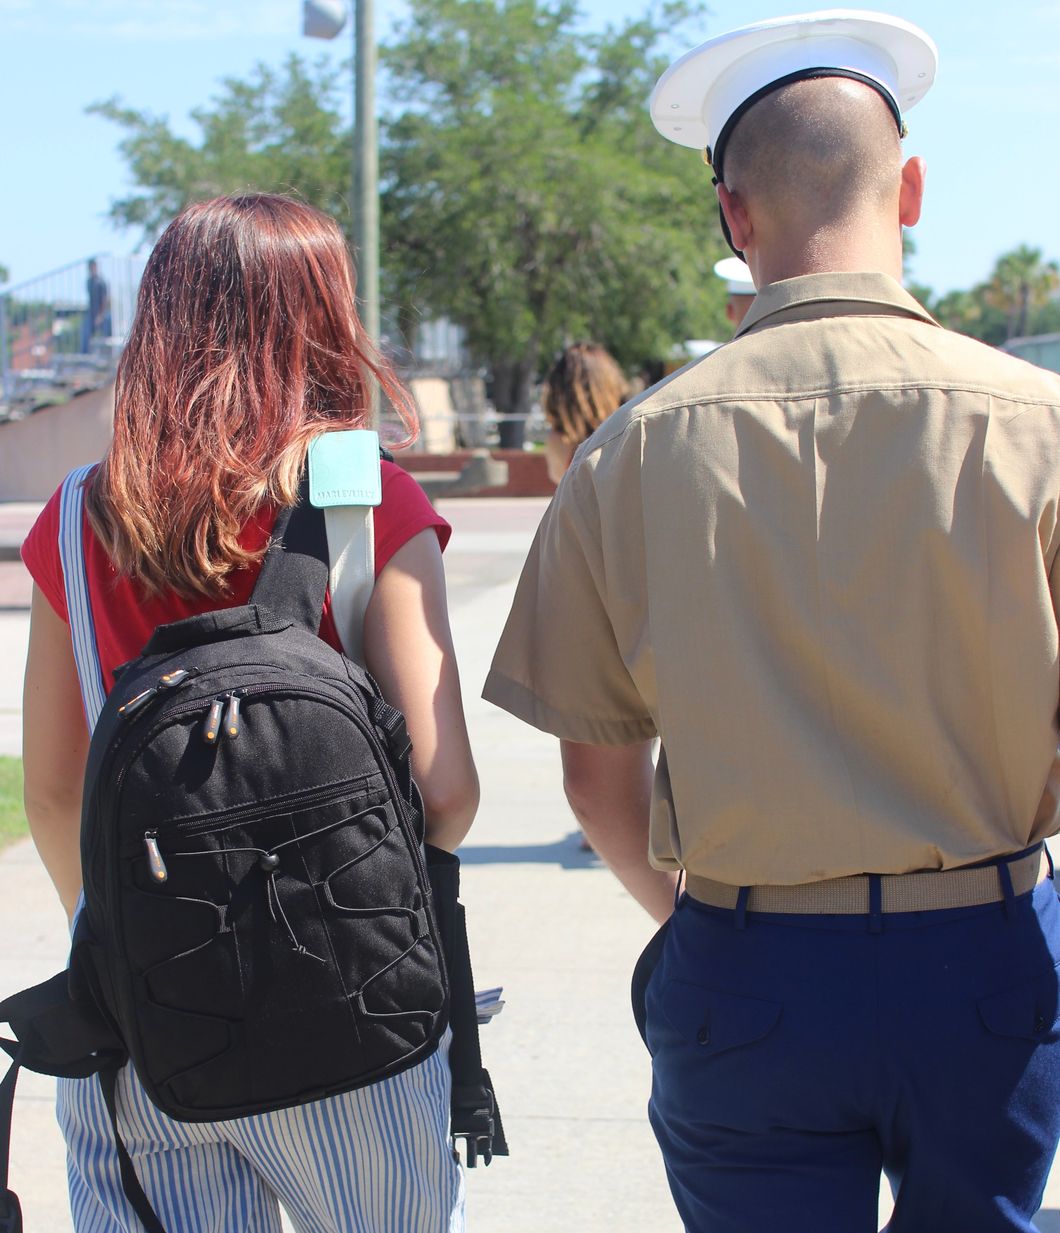 What It's Like To Go From 19-Year-Old College Student To 20-Year-Old Military Wife Overnight